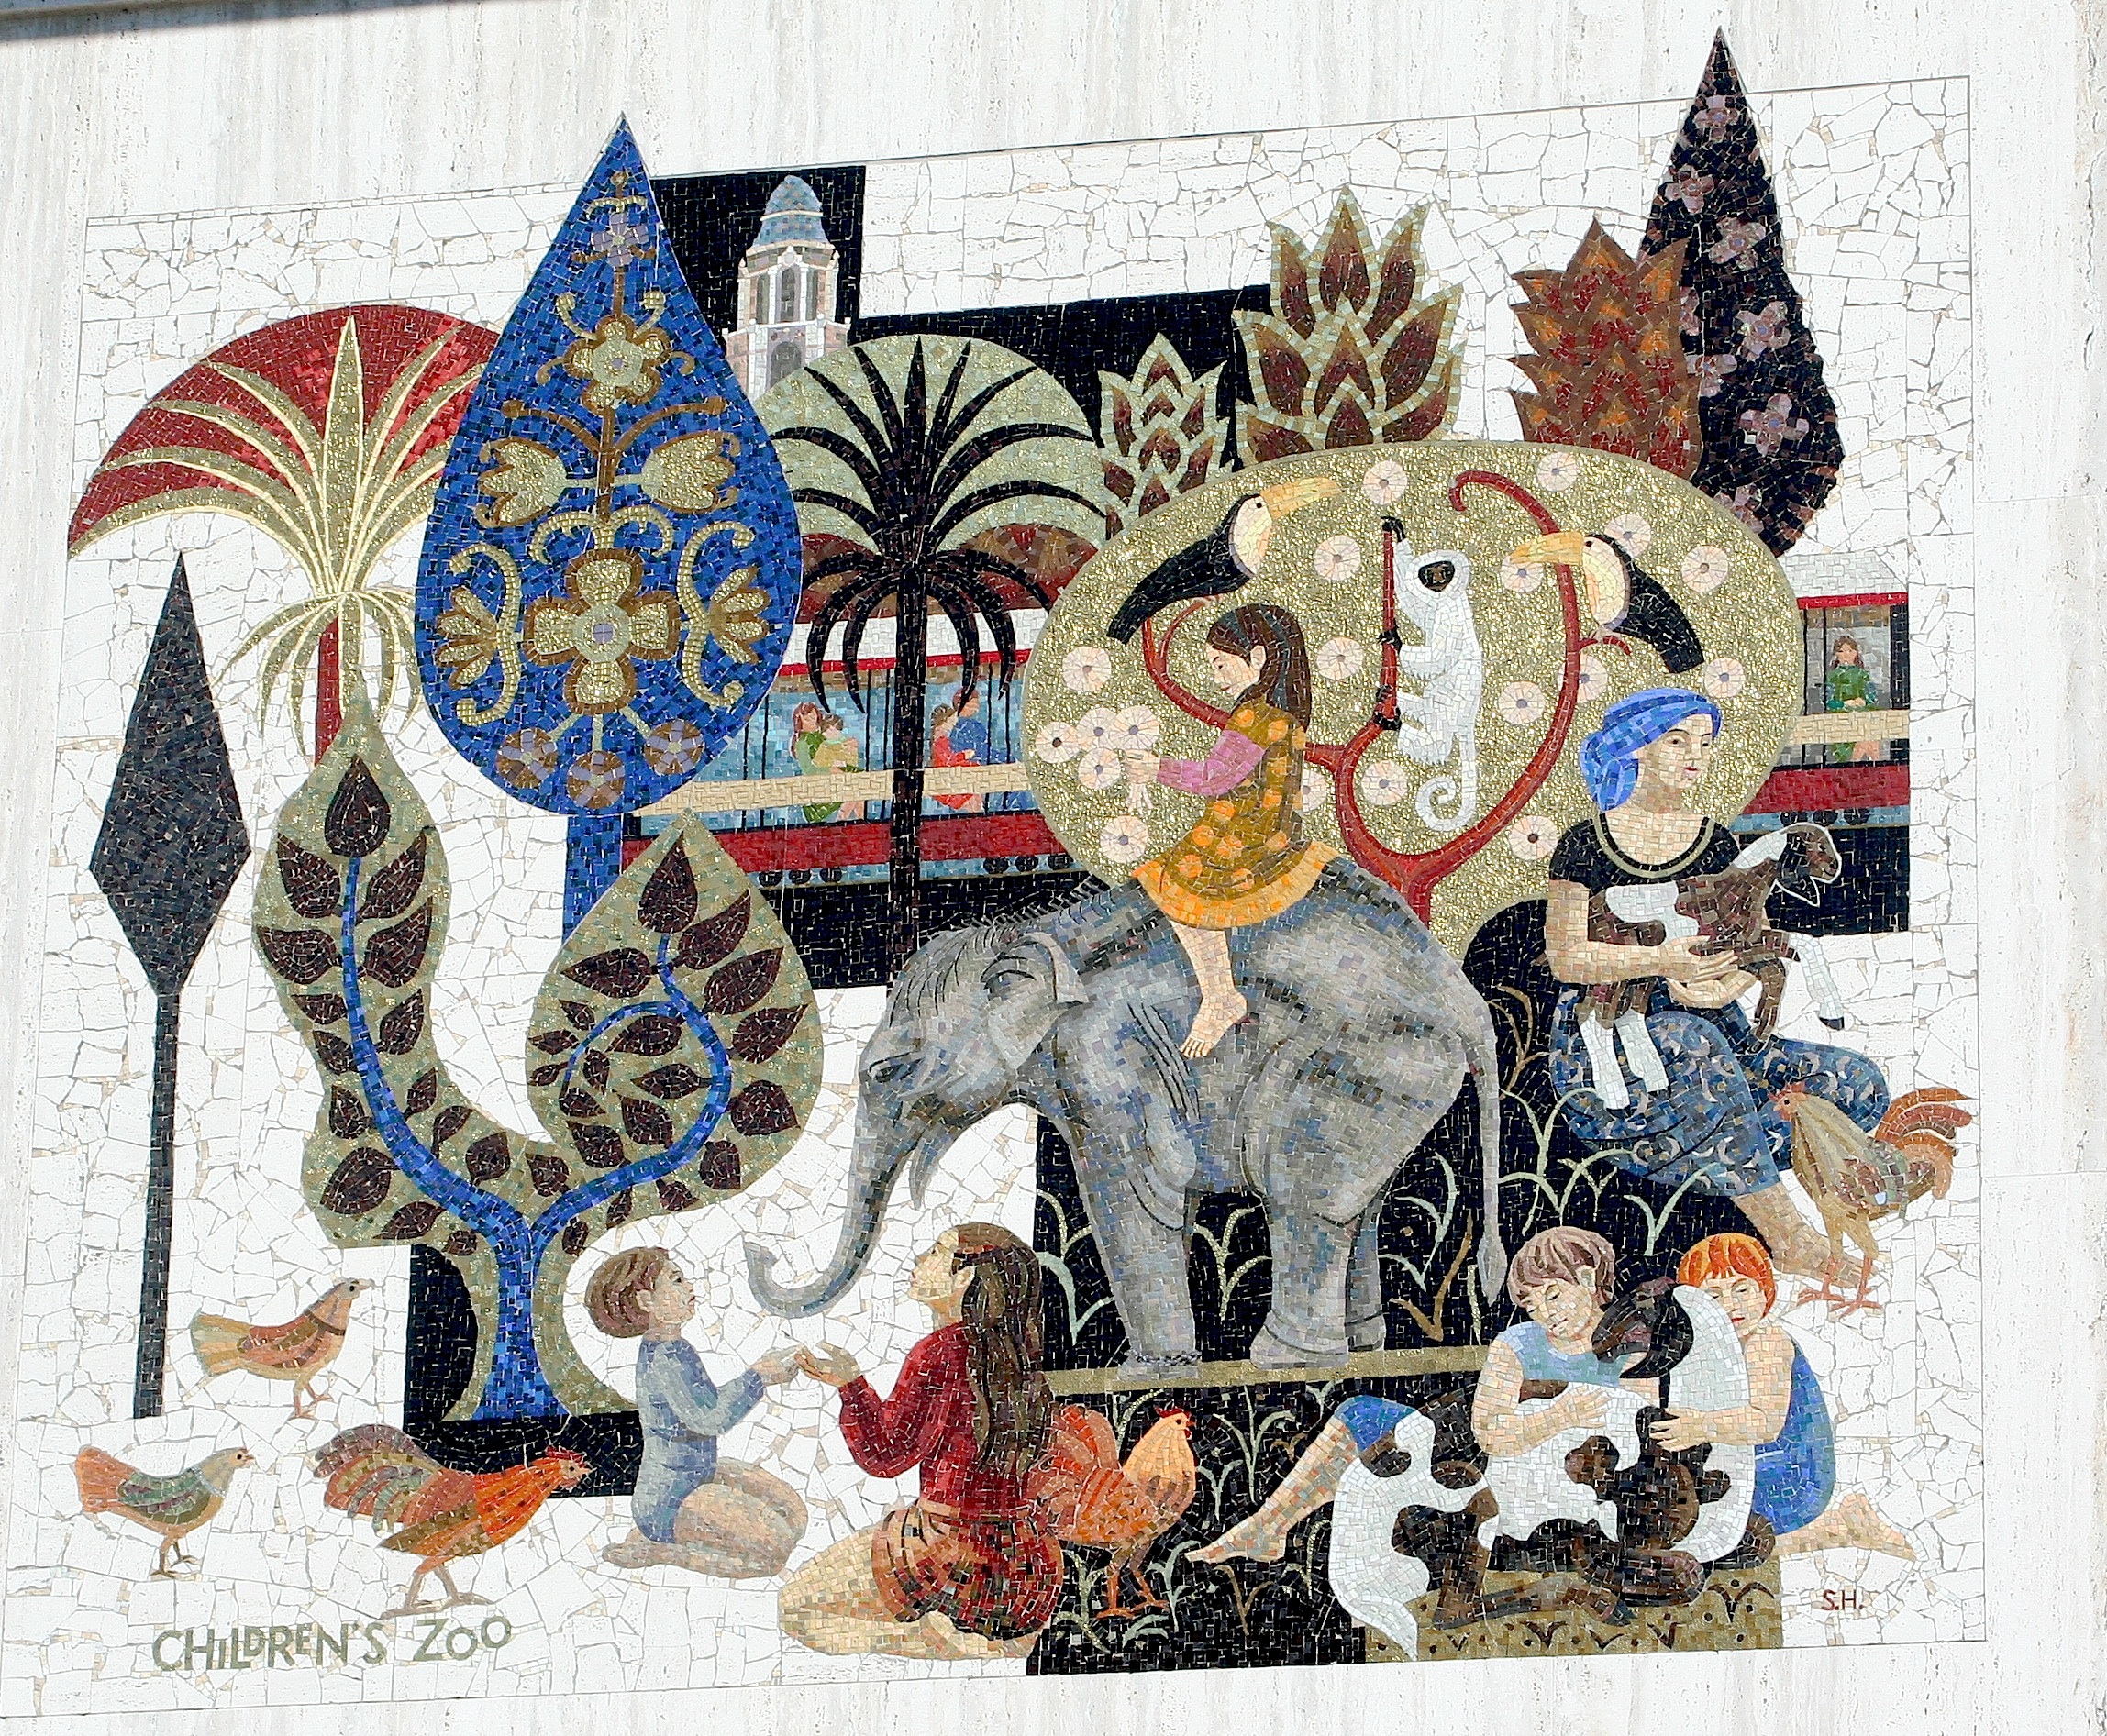 Sheets Studio, Pacific Beach, Zoo, 1977 -- one of the mosaics threatened with removal